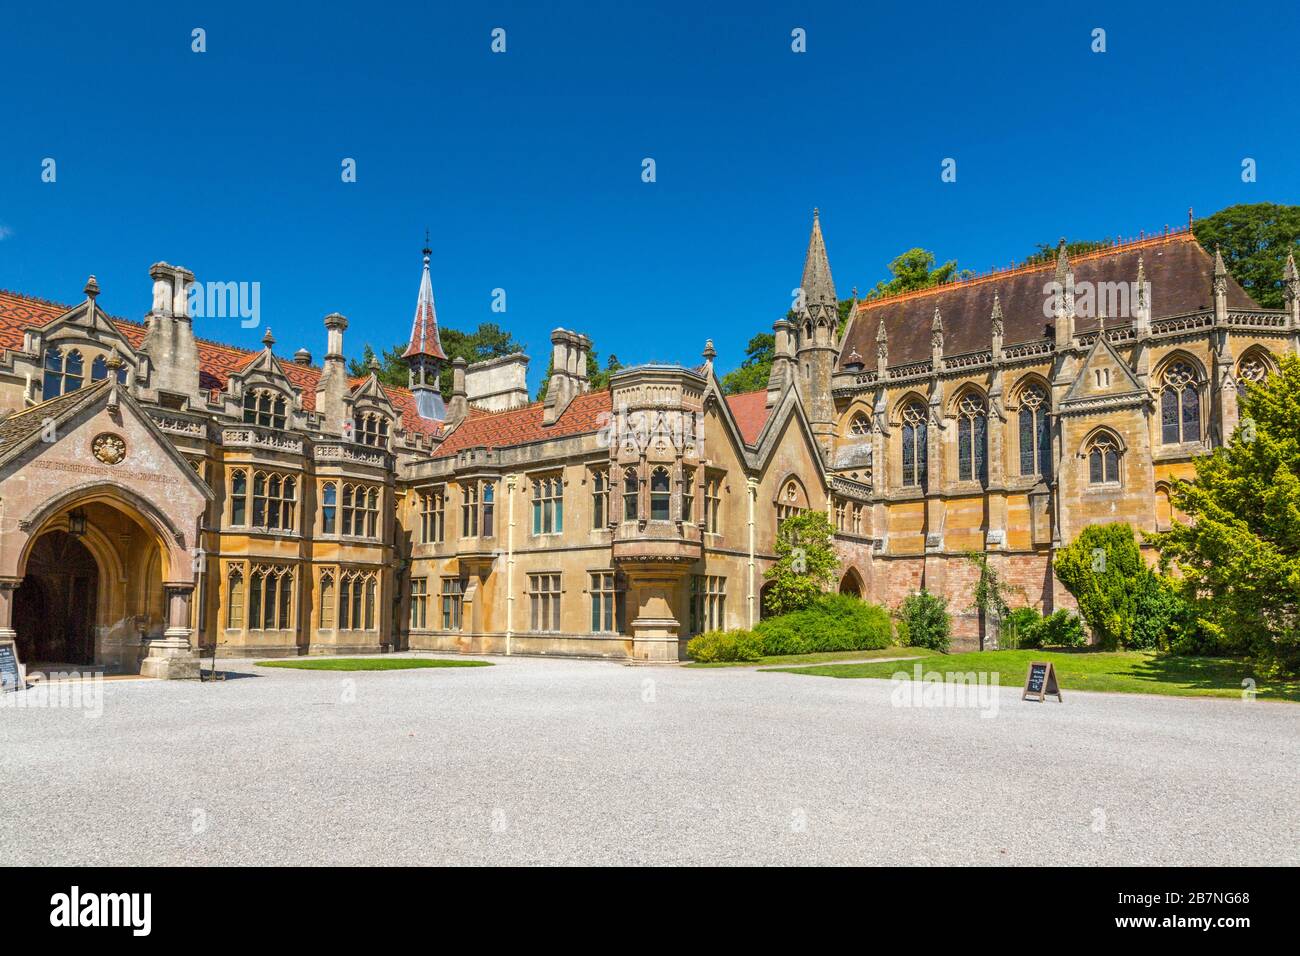 Victorian Gothic Revival architecture at Tyntesfield House, nr Wraxall, North Somerset, England, UK Stock Photo